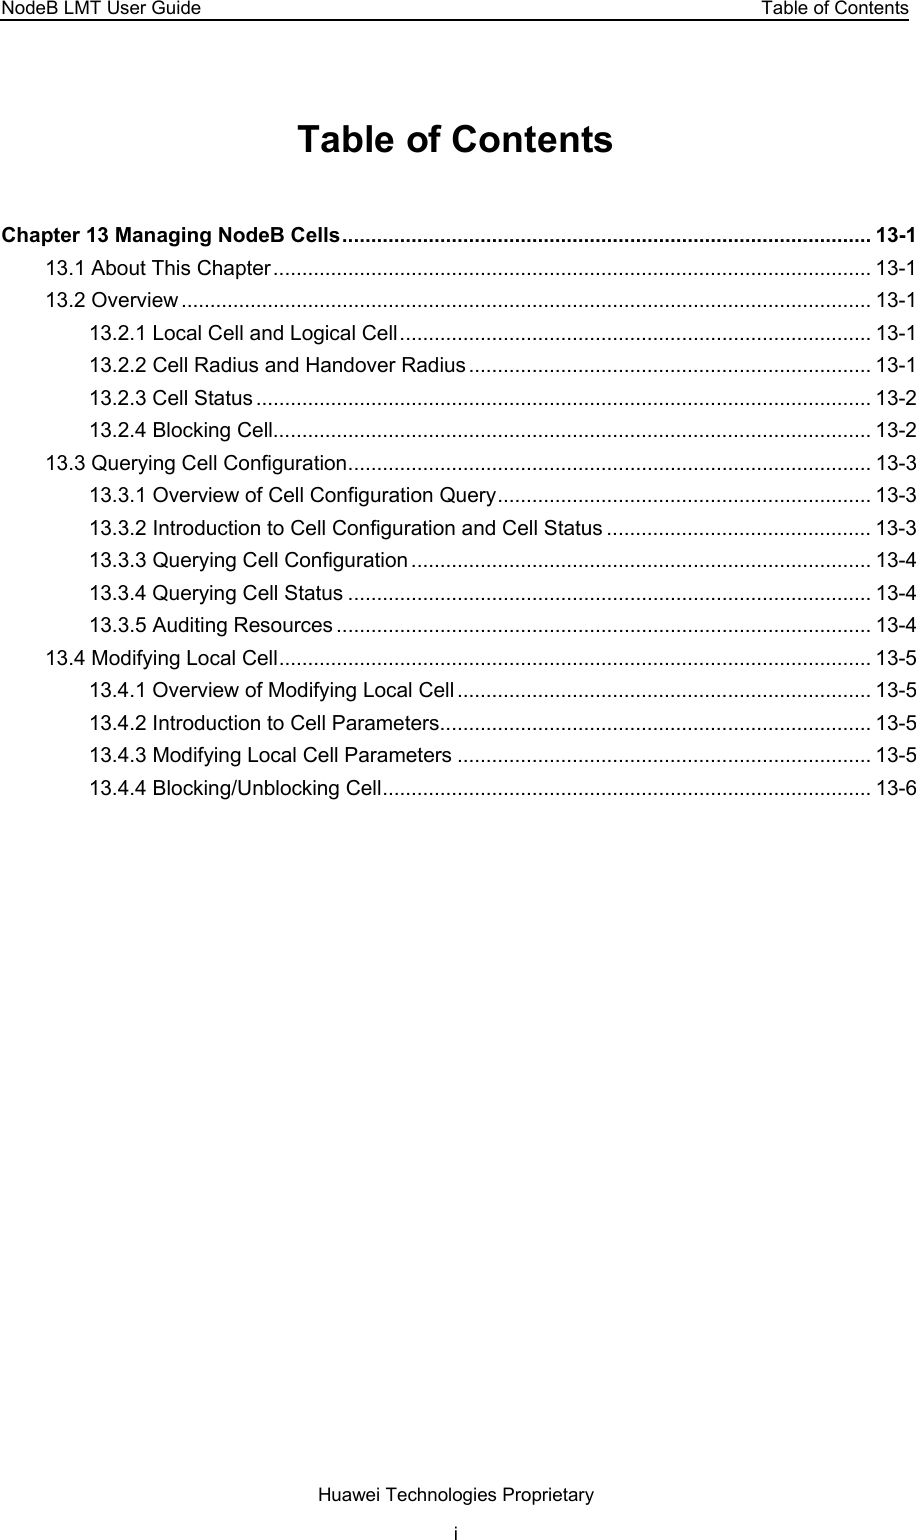 NodeB LMT User Guide  Table of Contents Table of Contents Chapter 13 Managing NodeB Cells............................................................................................ 13-1 13.1 About This Chapter........................................................................................................ 13-1 13.2 Overview ........................................................................................................................ 13-1 13.2.1 Local Cell and Logical Cell.................................................................................. 13-1 13.2.2 Cell Radius and Handover Radius...................................................................... 13-1 13.2.3 Cell Status........................................................................................................... 13-2 13.2.4 Blocking Cell........................................................................................................ 13-2 13.3 Querying Cell Configuration........................................................................................... 13-3 13.3.1 Overview of Cell Configuration Query................................................................. 13-3 13.3.2 Introduction to Cell Configuration and Cell Status .............................................. 13-3 13.3.3 Querying Cell Configuration................................................................................ 13-4 13.3.4 Querying Cell Status ........................................................................................... 13-4 13.3.5 Auditing Resources ............................................................................................. 13-4 13.4 Modifying Local Cell....................................................................................................... 13-5 13.4.1 Overview of Modifying Local Cell........................................................................ 13-5 13.4.2 Introduction to Cell Parameters........................................................................... 13-5 13.4.3 Modifying Local Cell Parameters ........................................................................ 13-5 13.4.4 Blocking/Unblocking Cell..................................................................................... 13-6 Huawei Technologies Proprietary i 